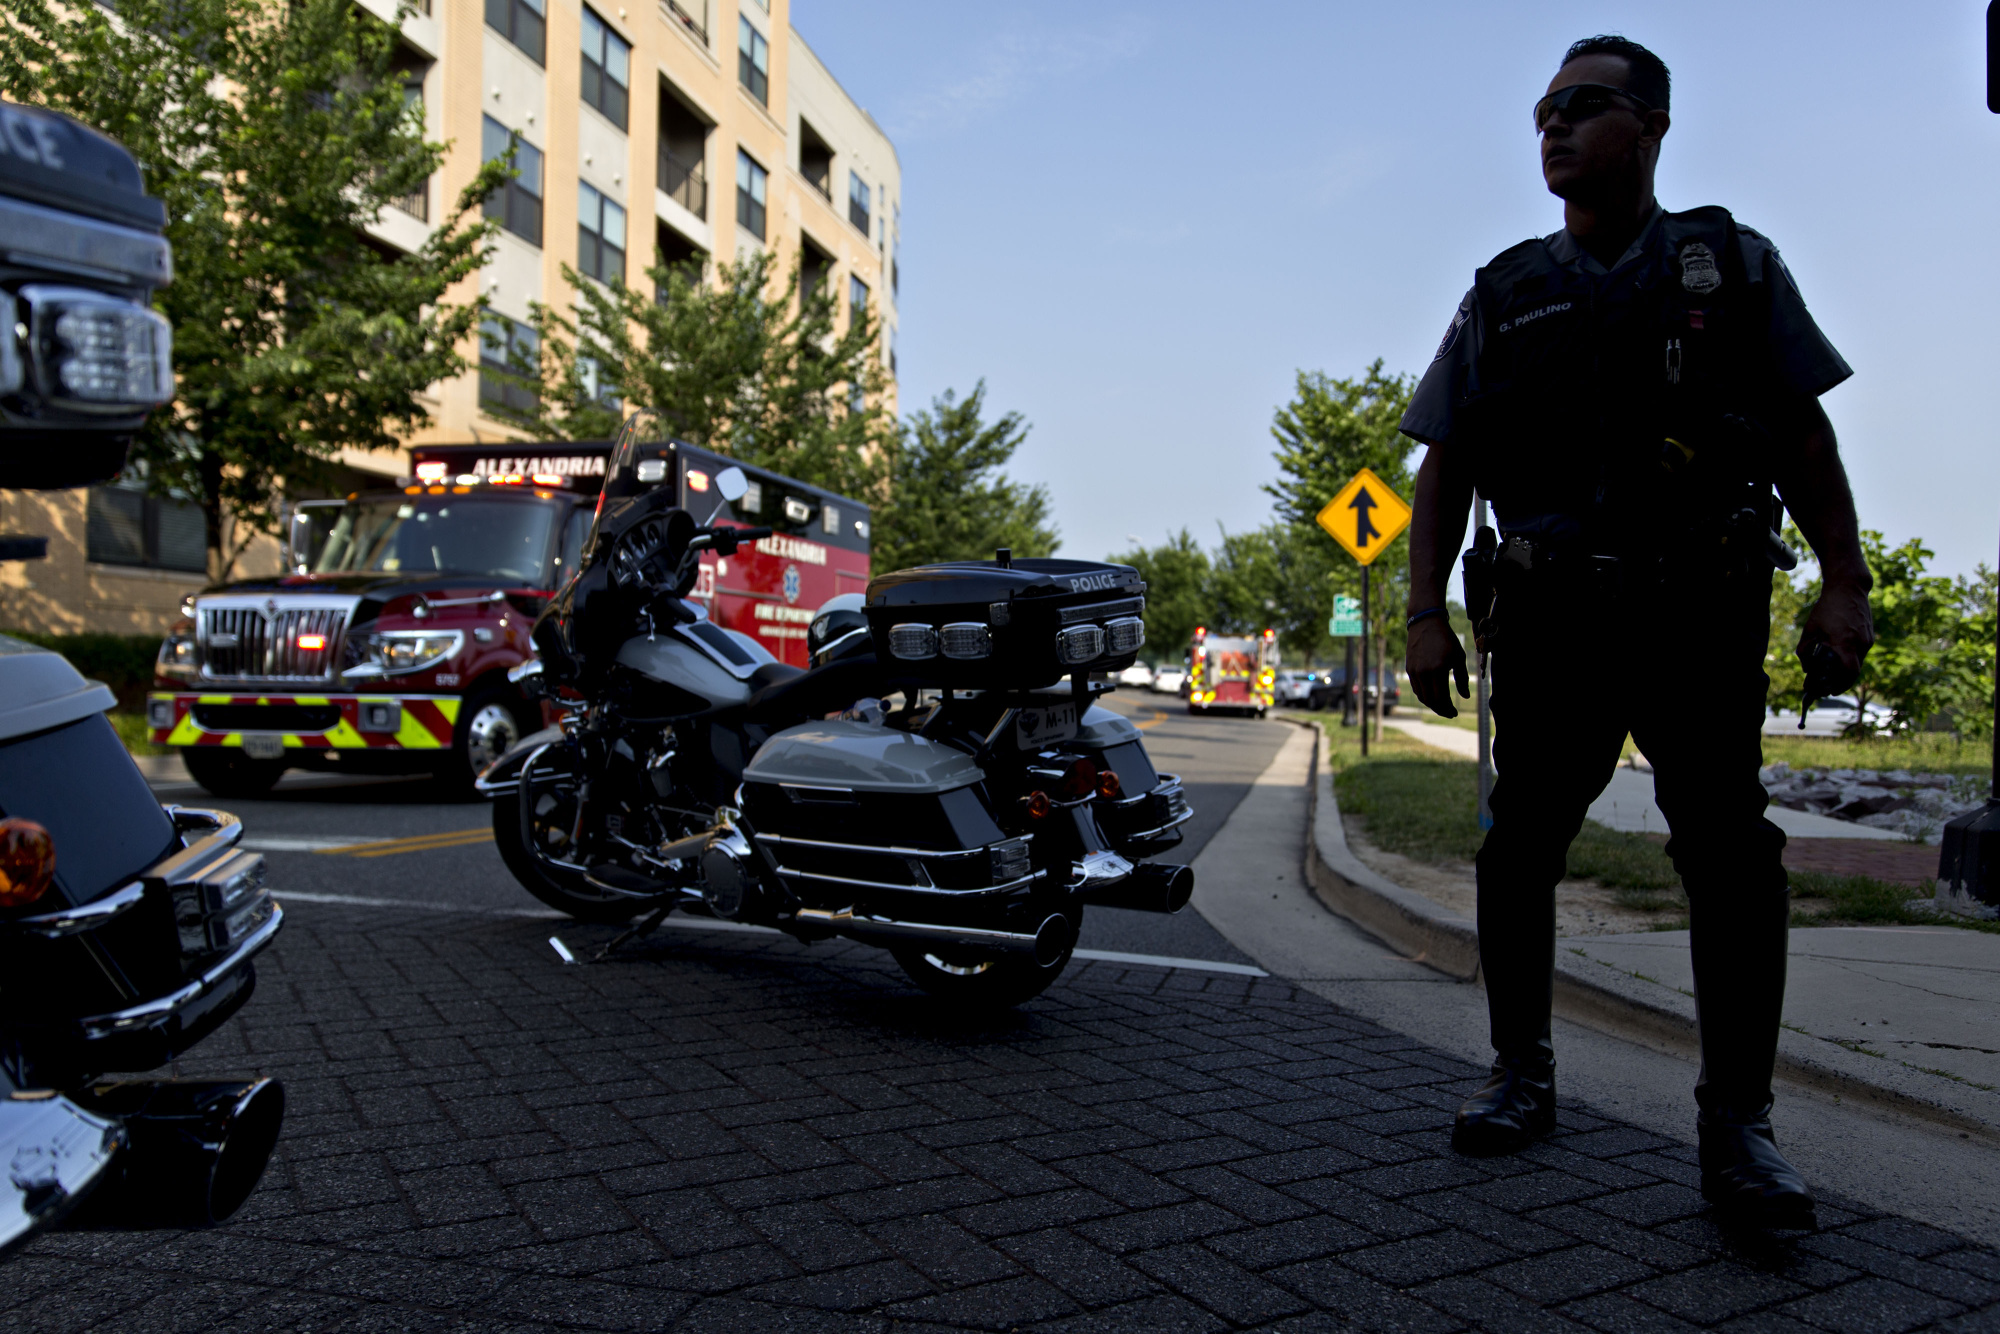 Emergency services near the Eugene Simpson Stadium Park following a&nbsp;shooting that targeted Republican members of Congress,&nbsp;in Virginia&nbsp;on June 14, 2017.